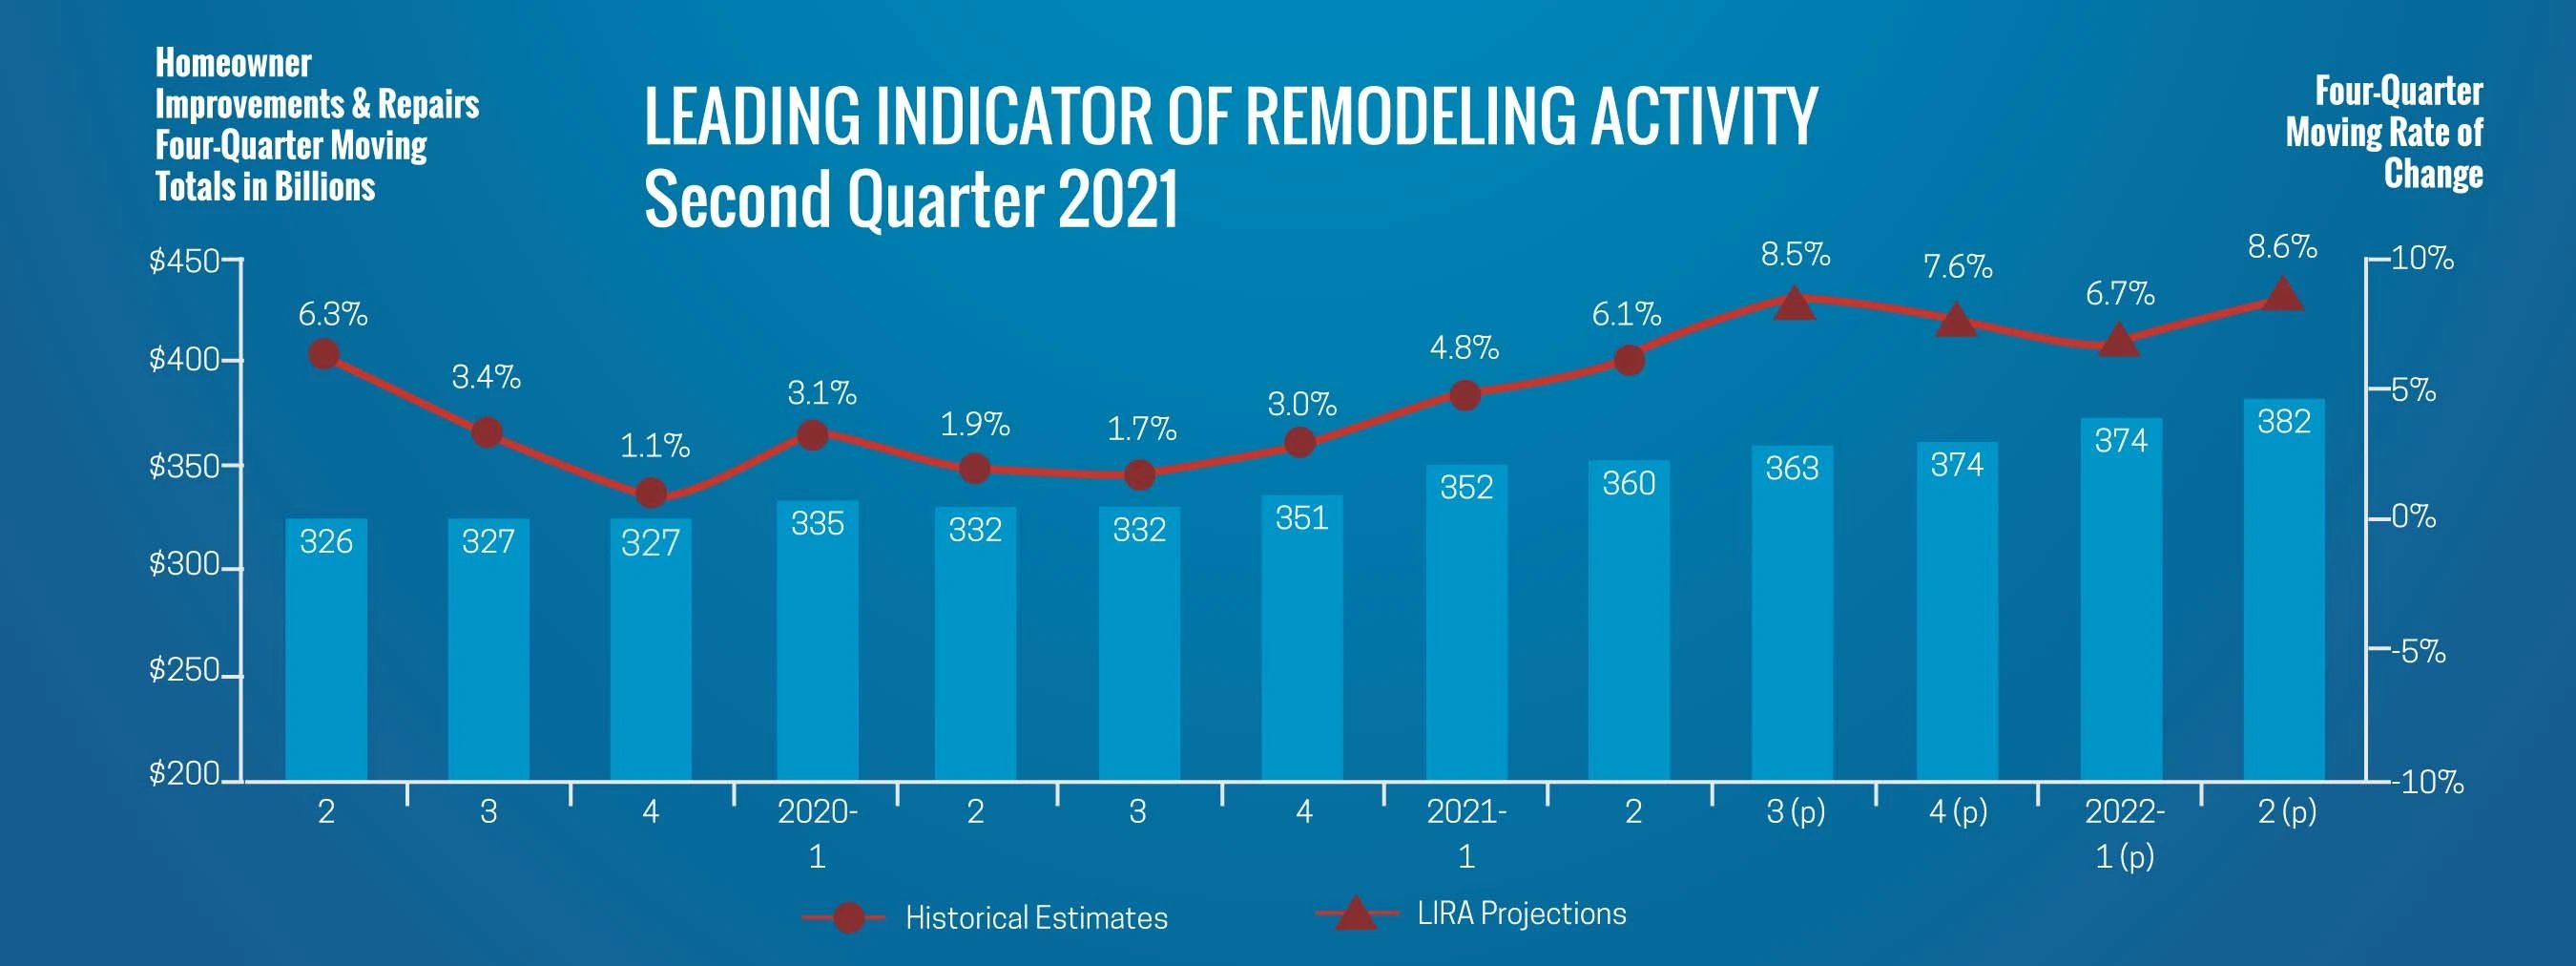 leading indicator of remodeling activity